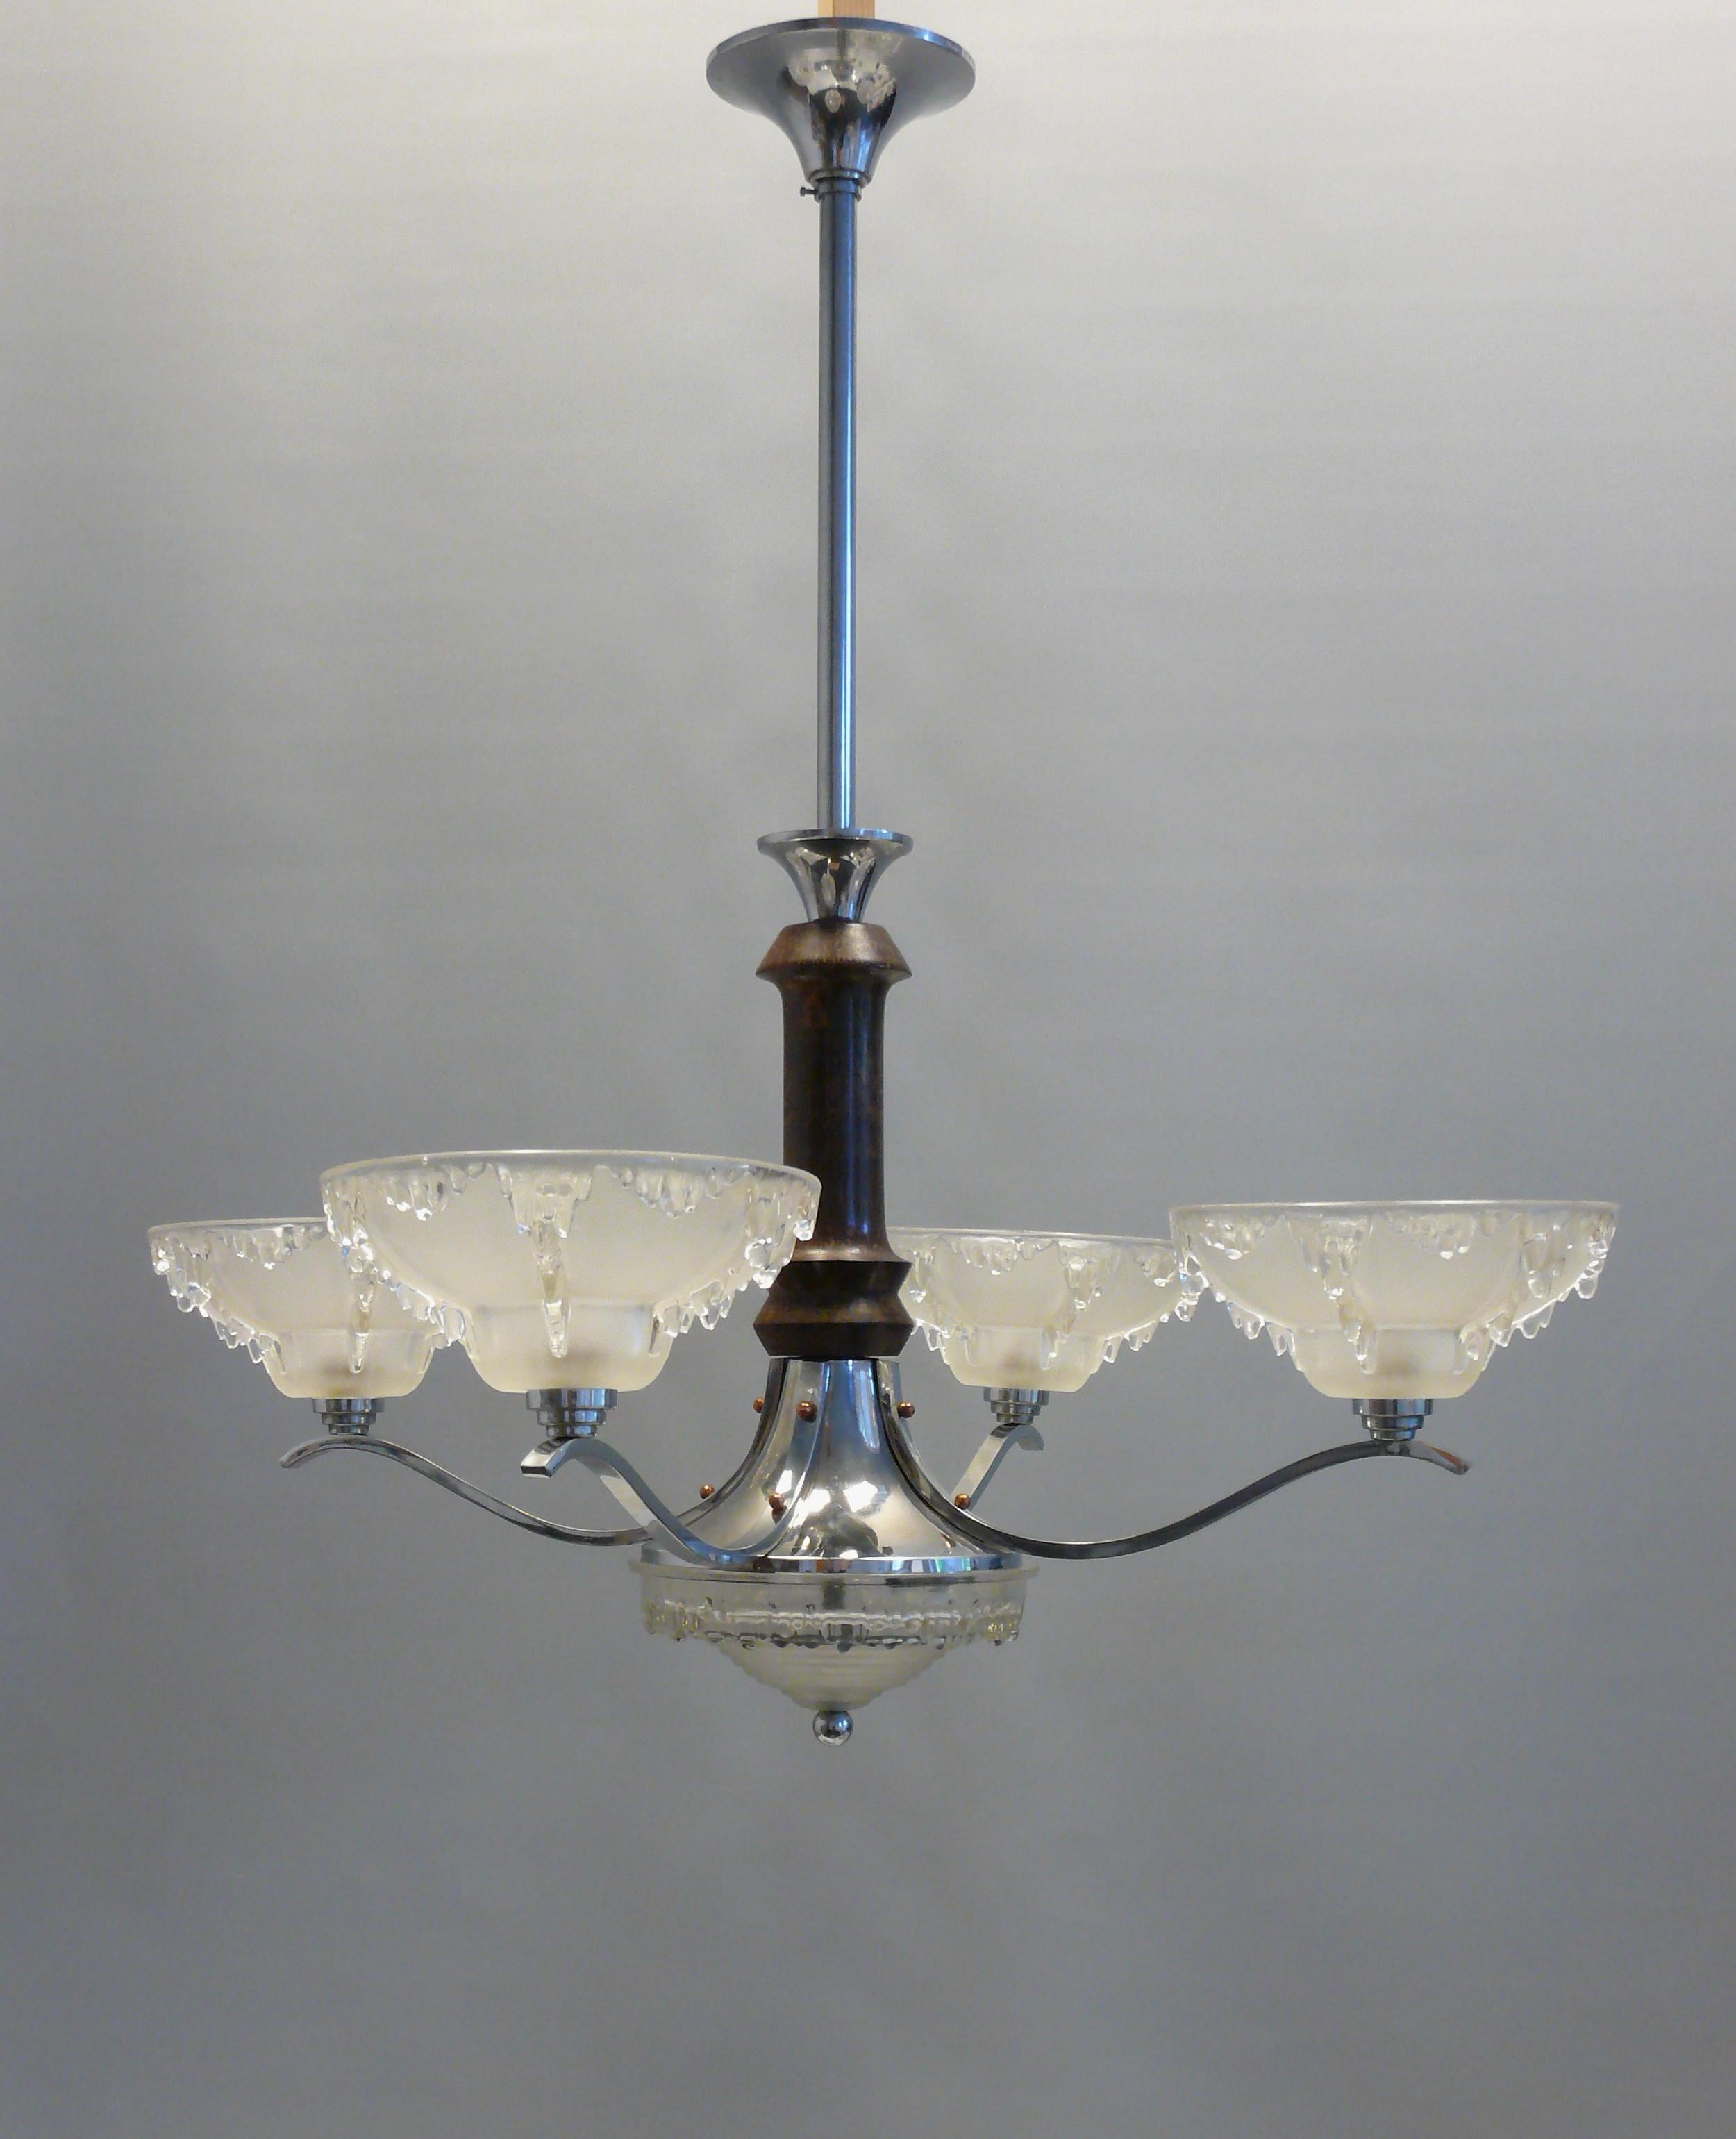 Stunning French ceiling chandelier from the 1930s - original Art Deco. The solid, chrome-plated chandelier has a lining made of walnut wood in the lower area of ​​the pendulum rod and a lining with a chrome-plated tube in the upper area. The